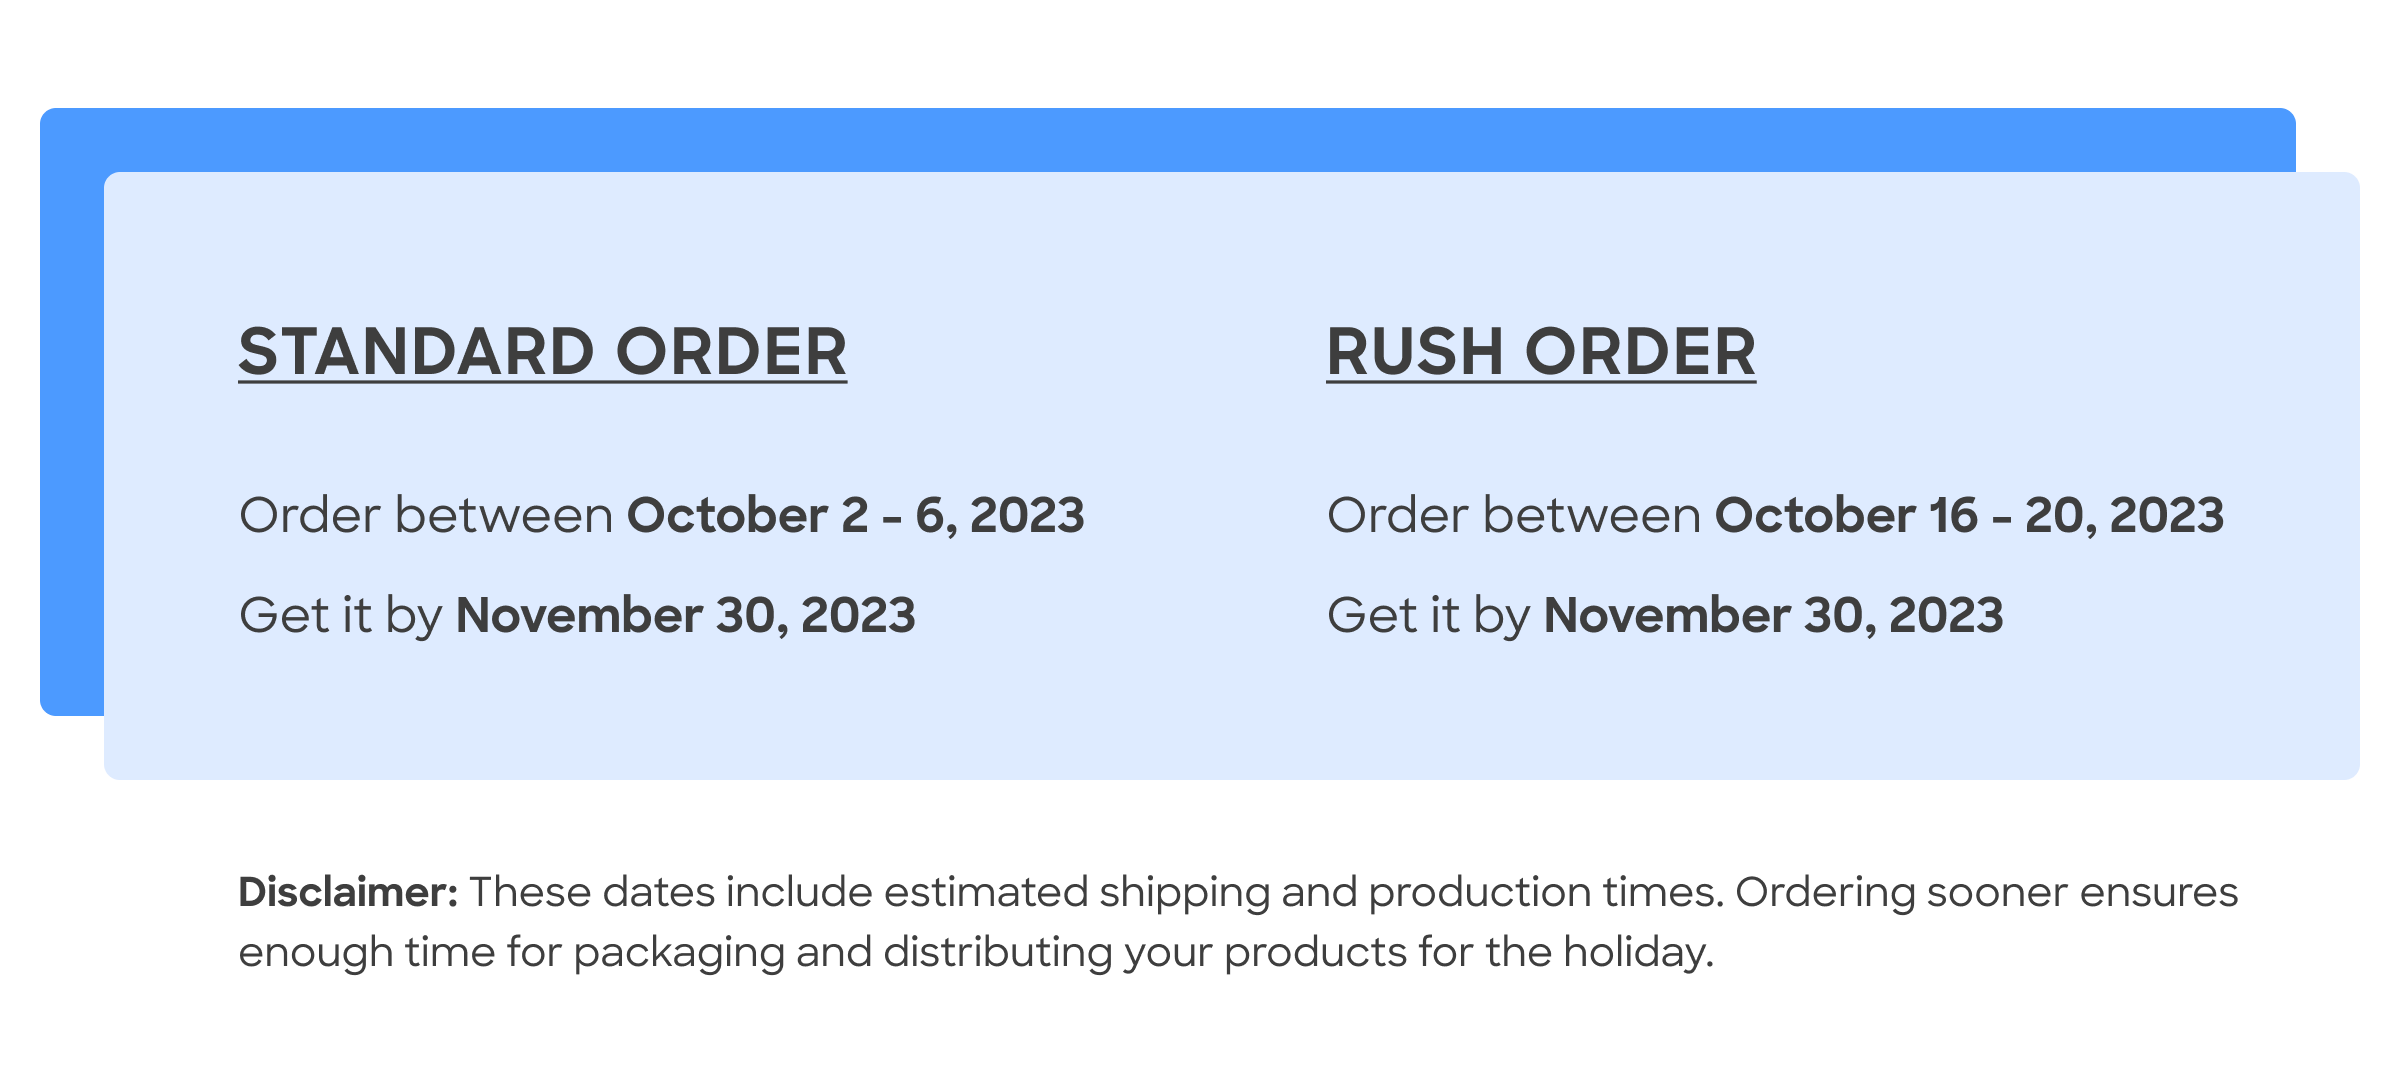 Ordering deadlines for standard and rush orders for holiday packaging